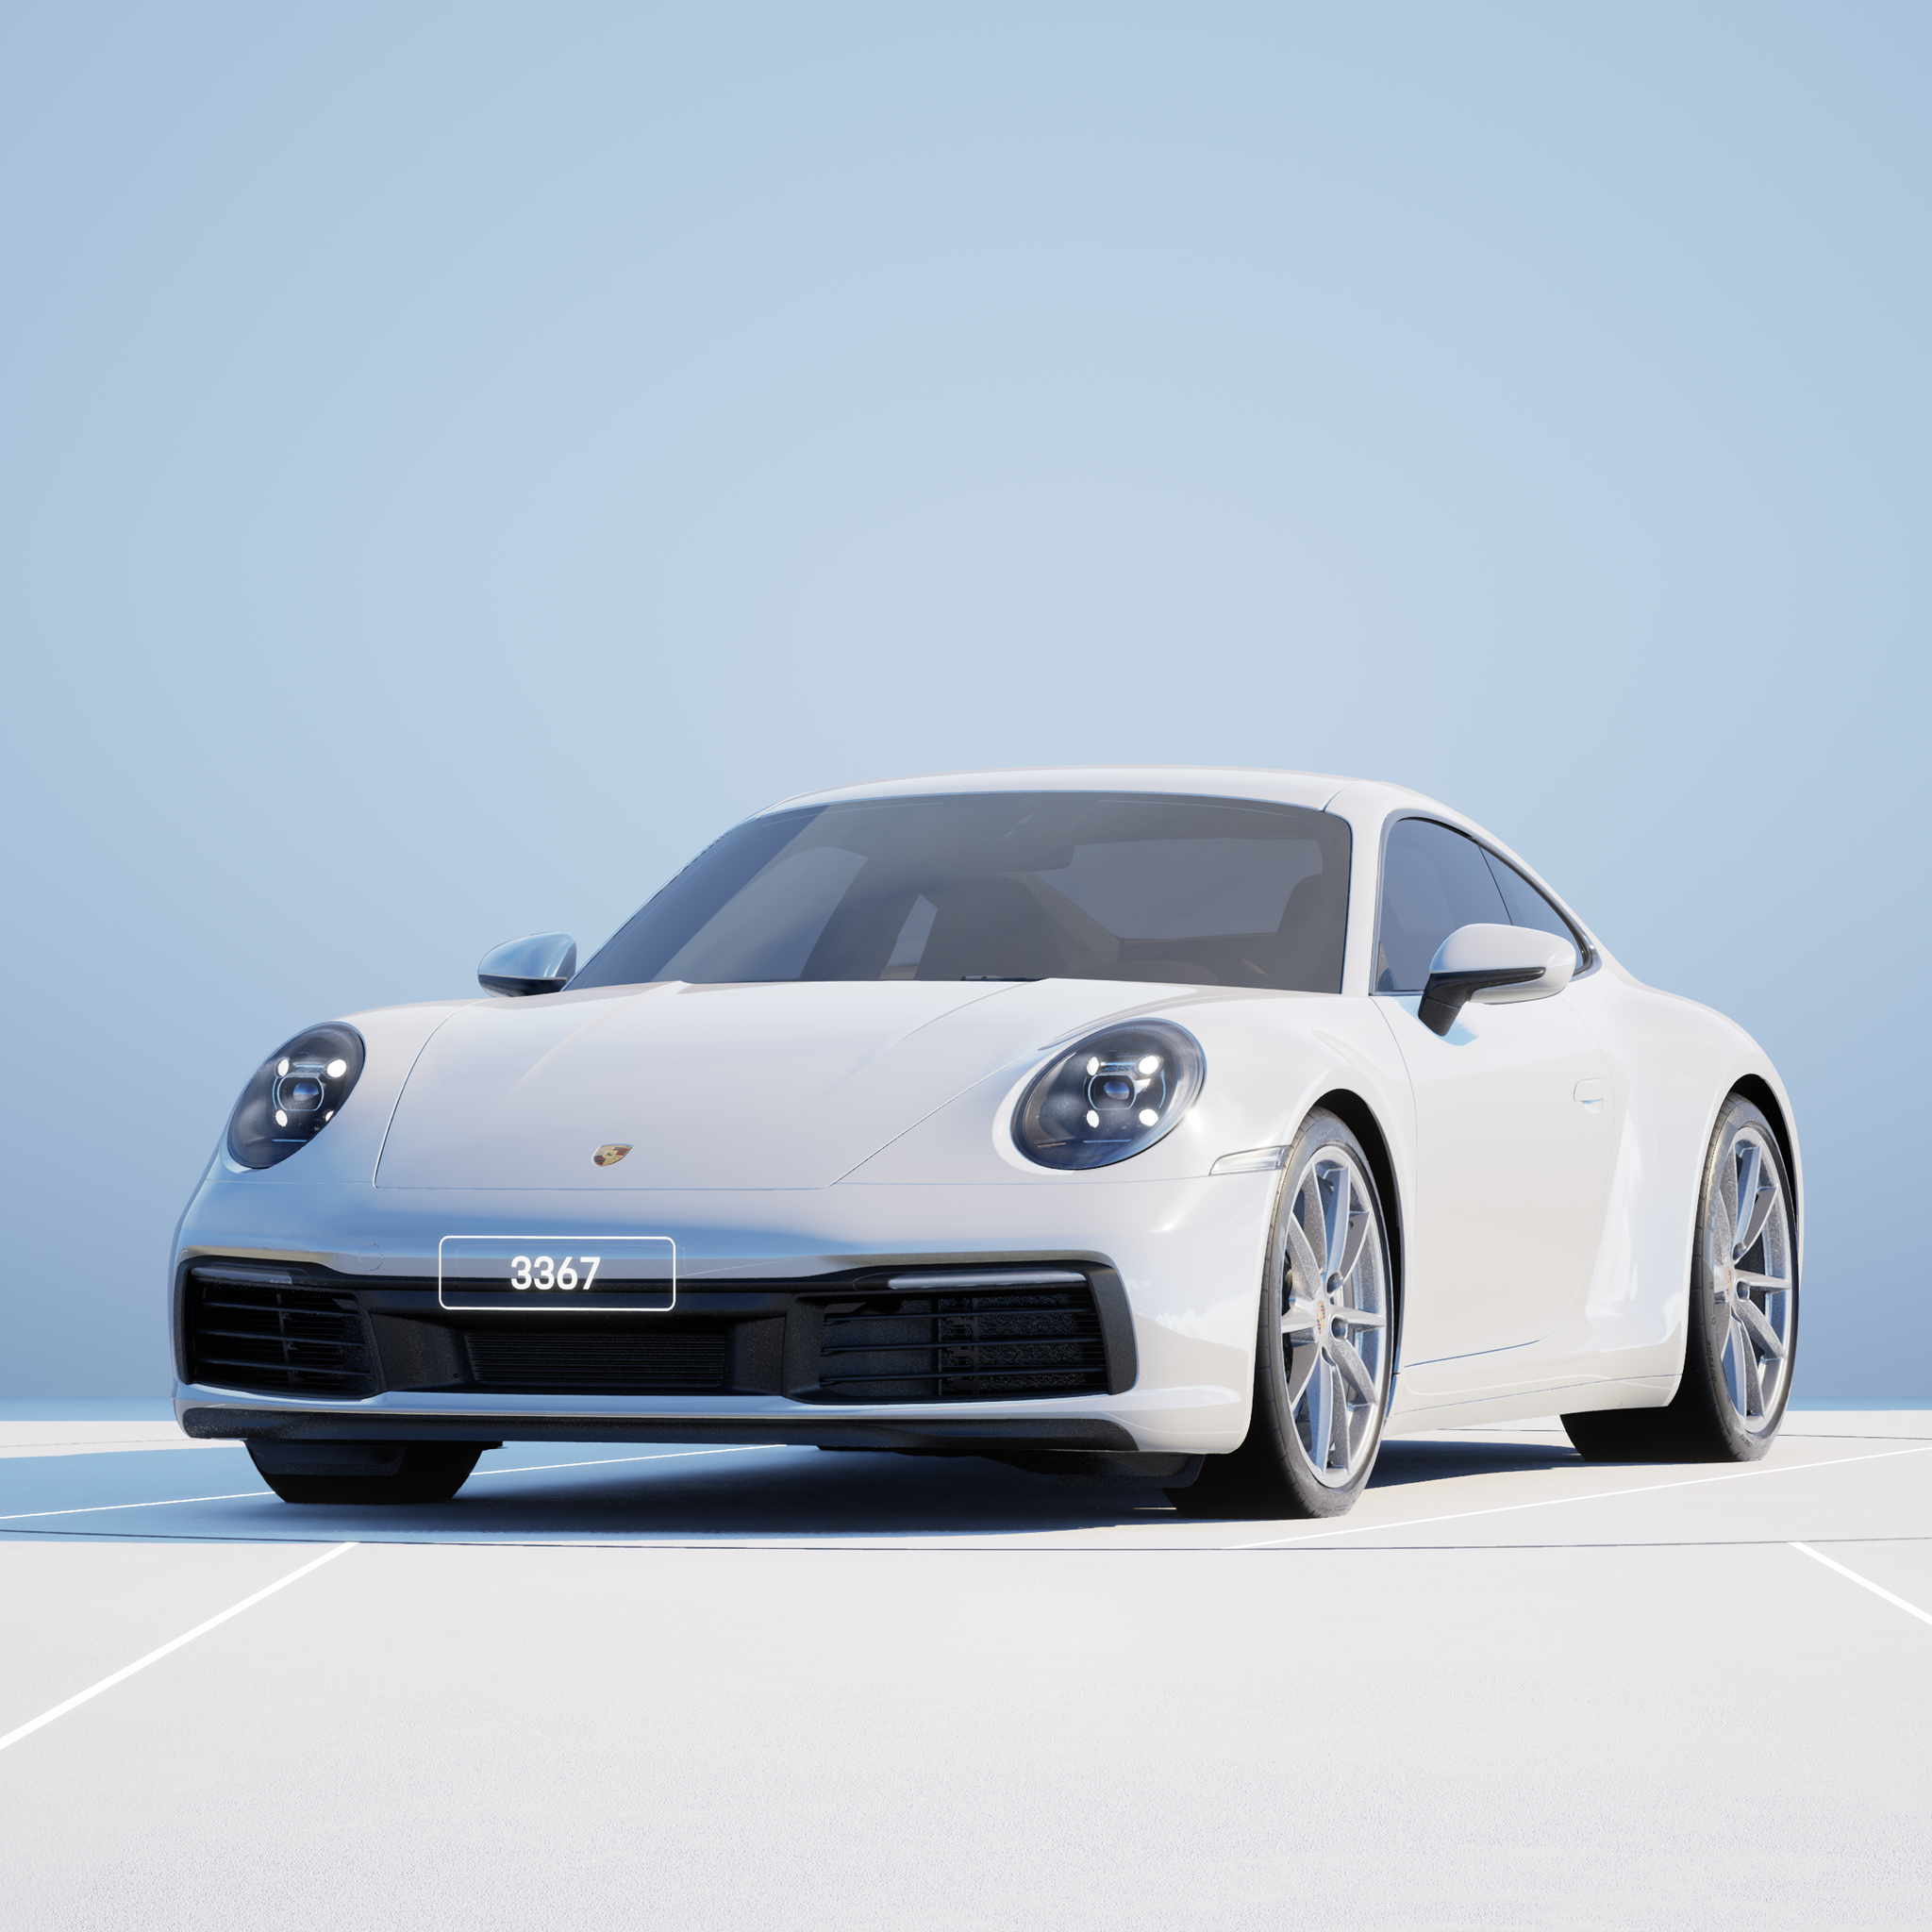 The PORSCHΞ 911 3367 image in phase